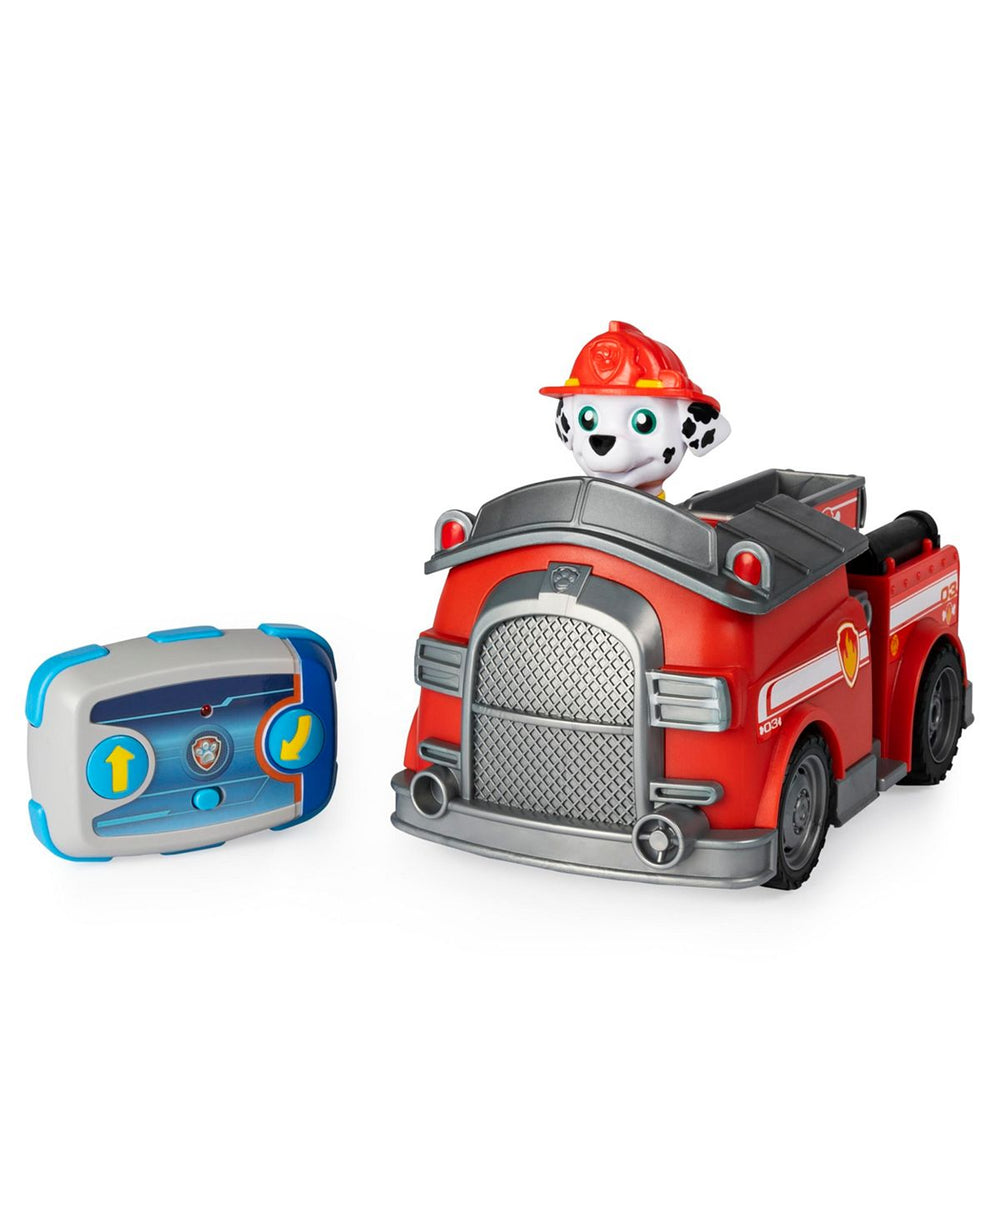 Paw Patrol Marshall's Remote Control Fire Truck with Easy-to-Use Pup Pad Controller